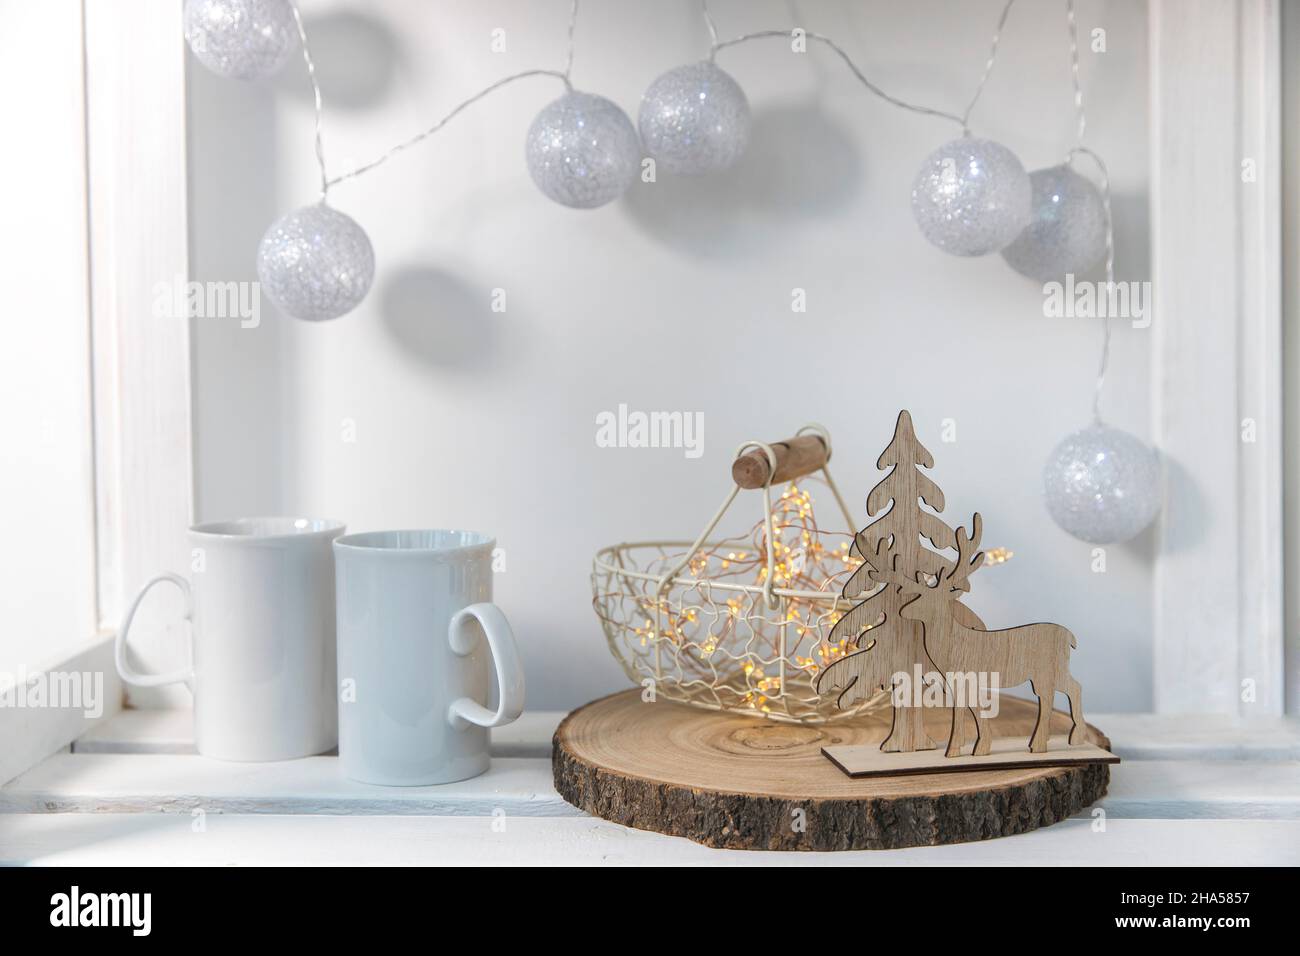 A wooden figurine of deer and spruce against background of small chest of drawers, a metal decorative basket, two mugs of tea, a silver garland of thr Stock Photo